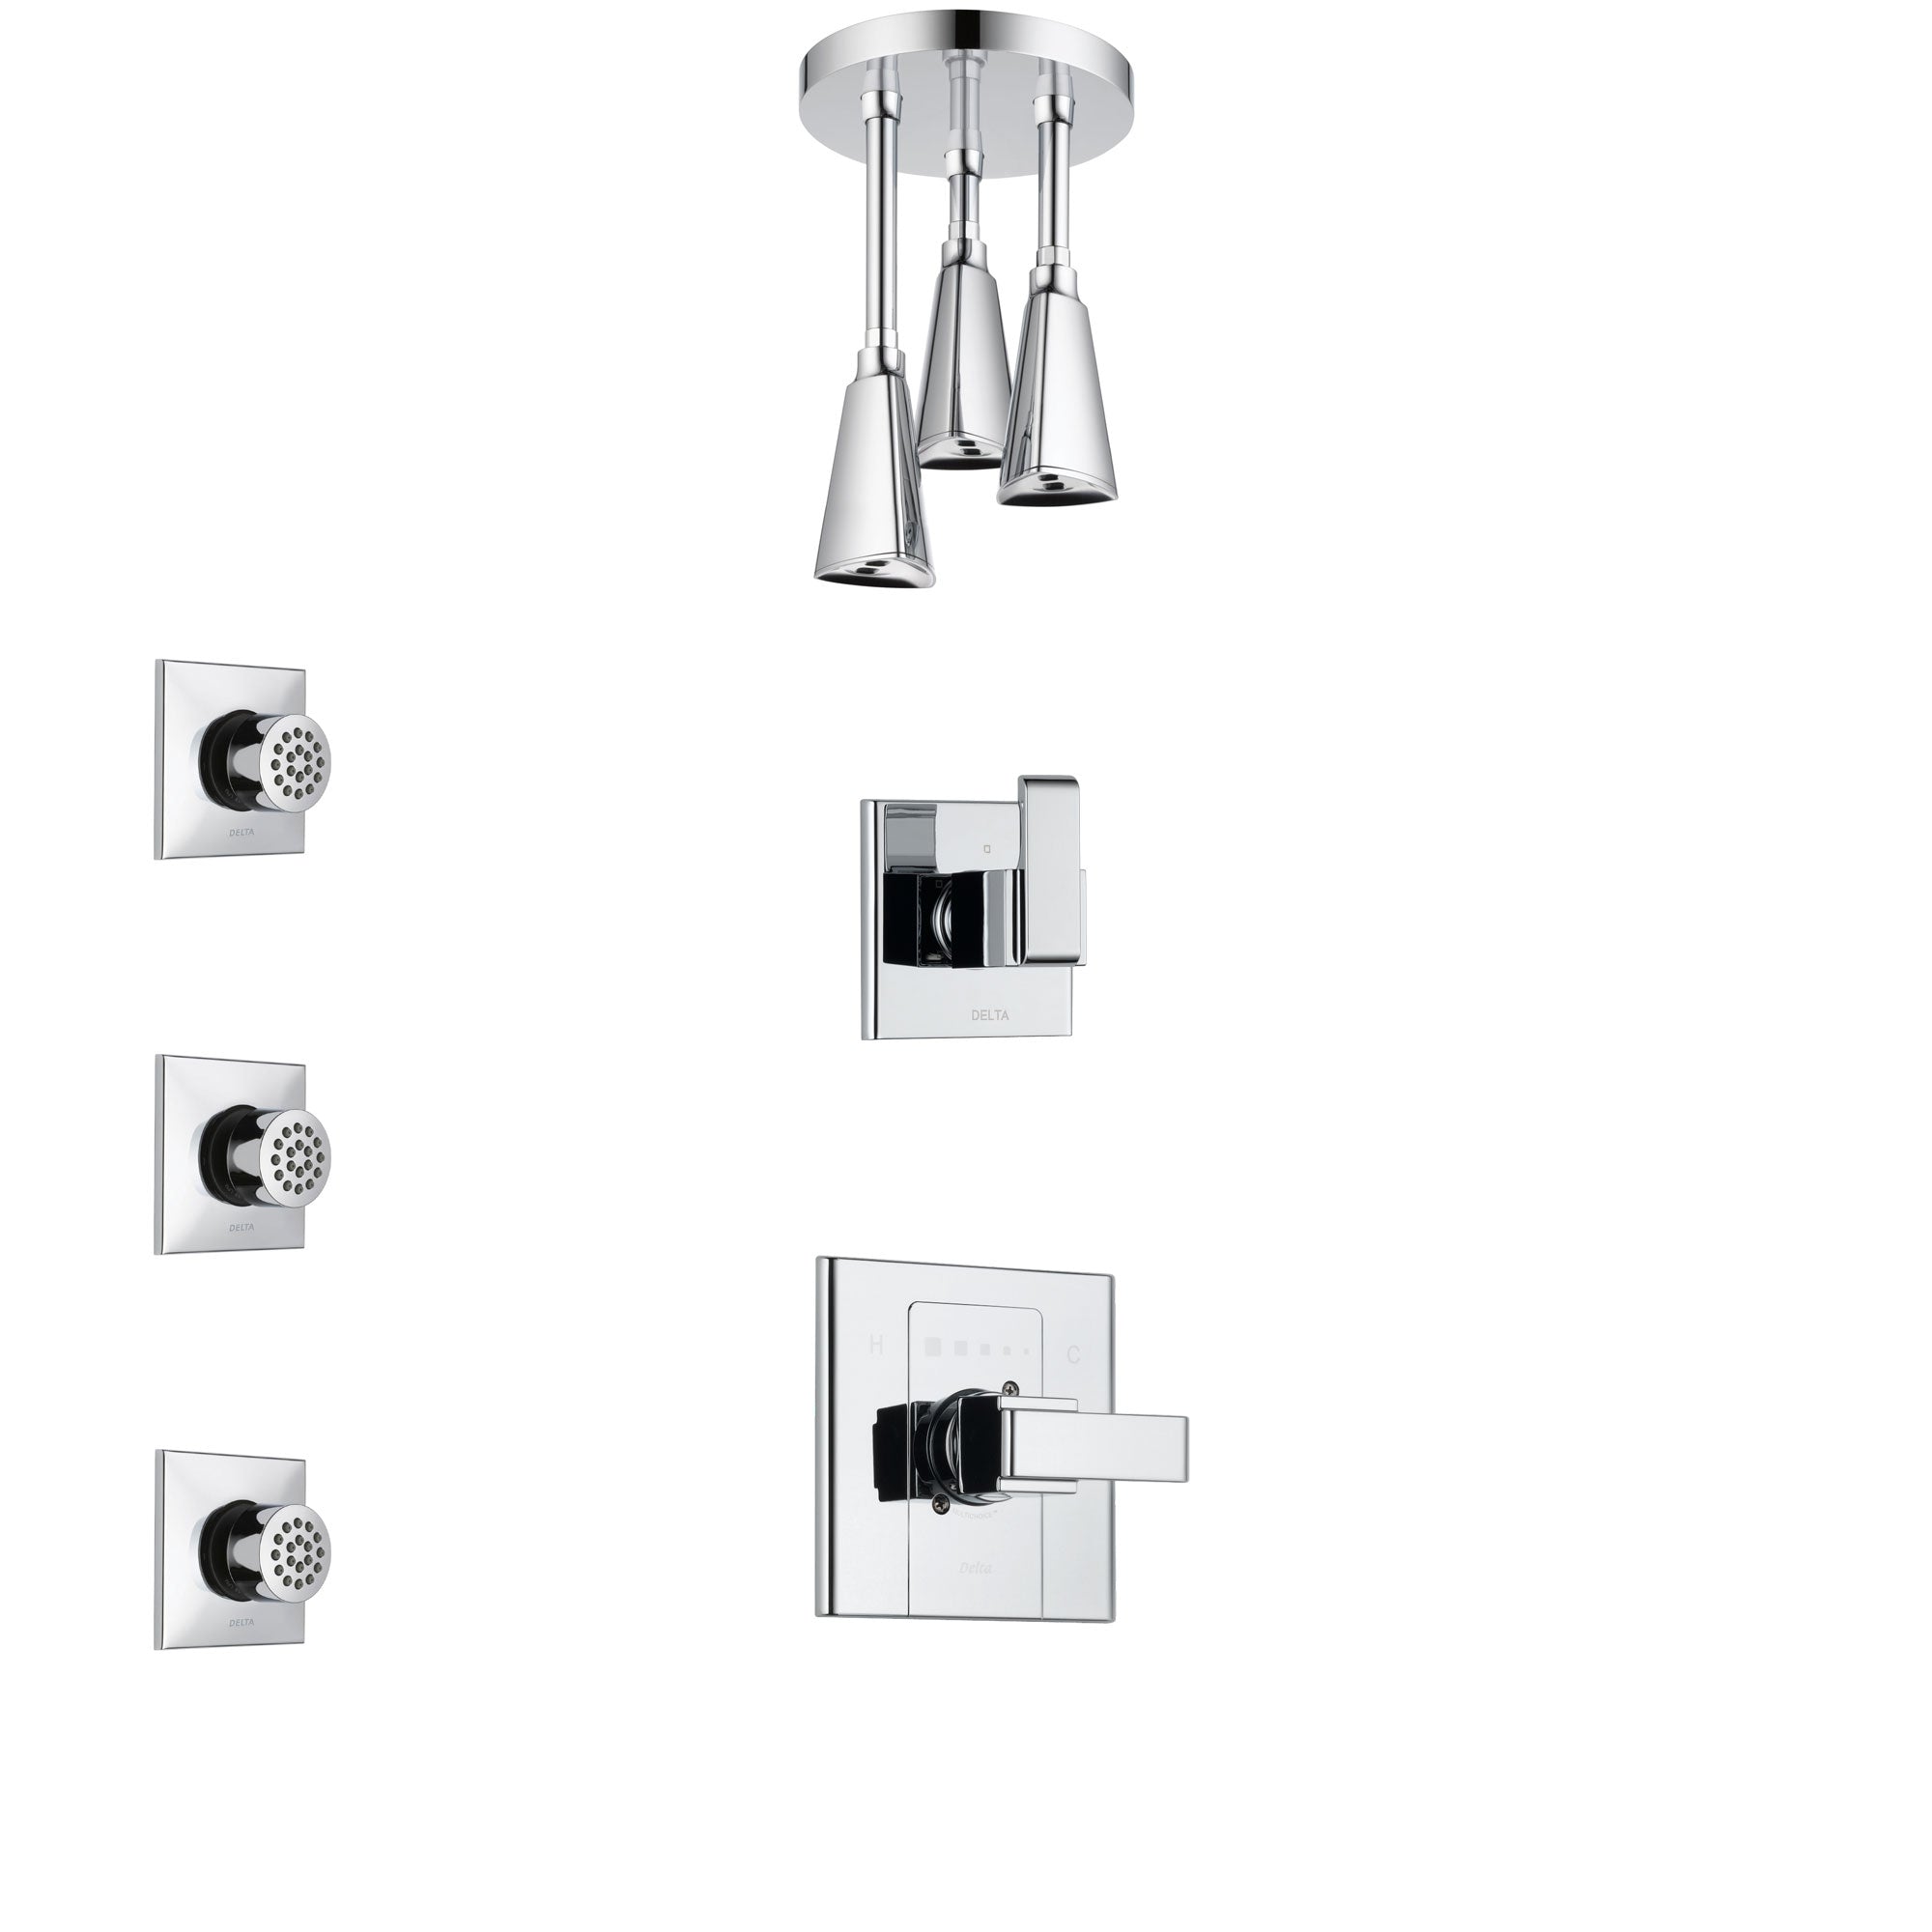 Delta Arzo Chrome Finish Shower System with Control Handle, 3-Setting Diverter, Ceiling Mount Showerhead, and 3 Body Sprays SS14863